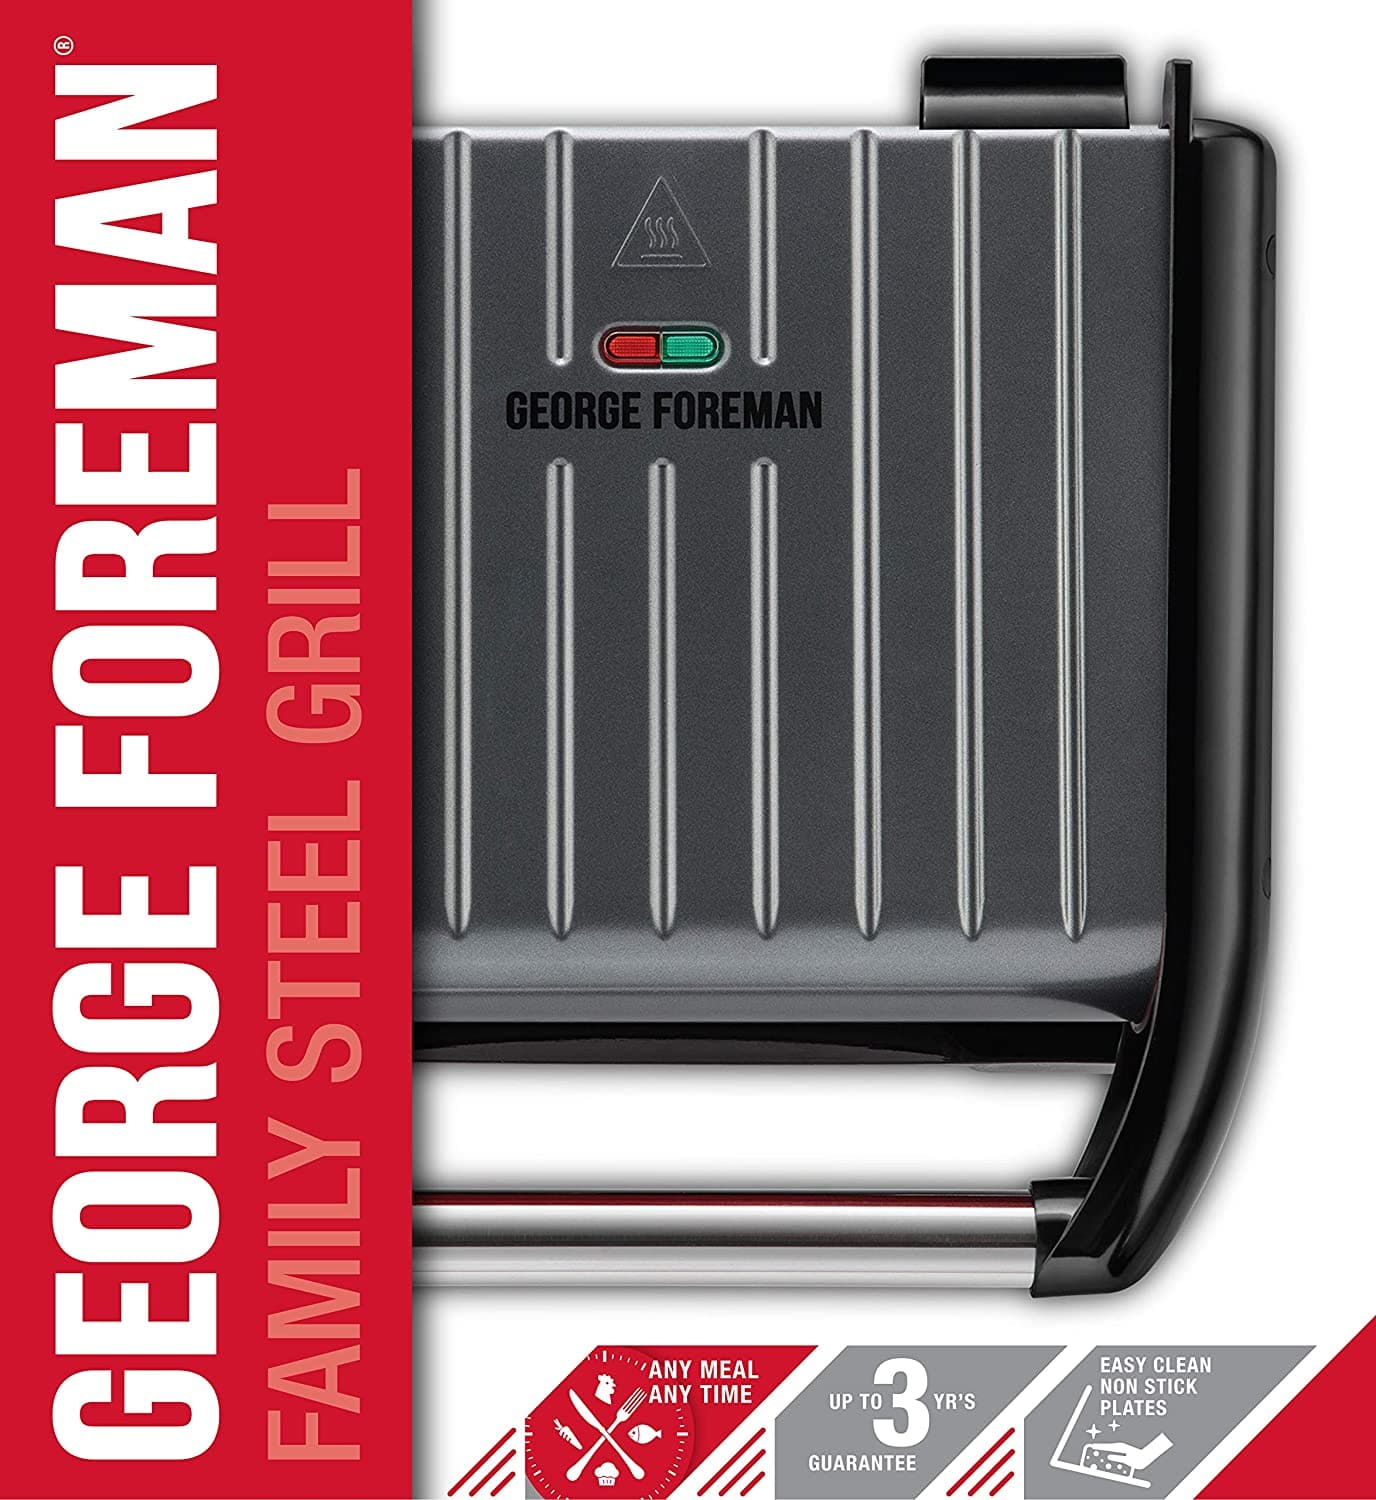 George Foreman Large Steel Grill Family, Grey 1850W - 25051